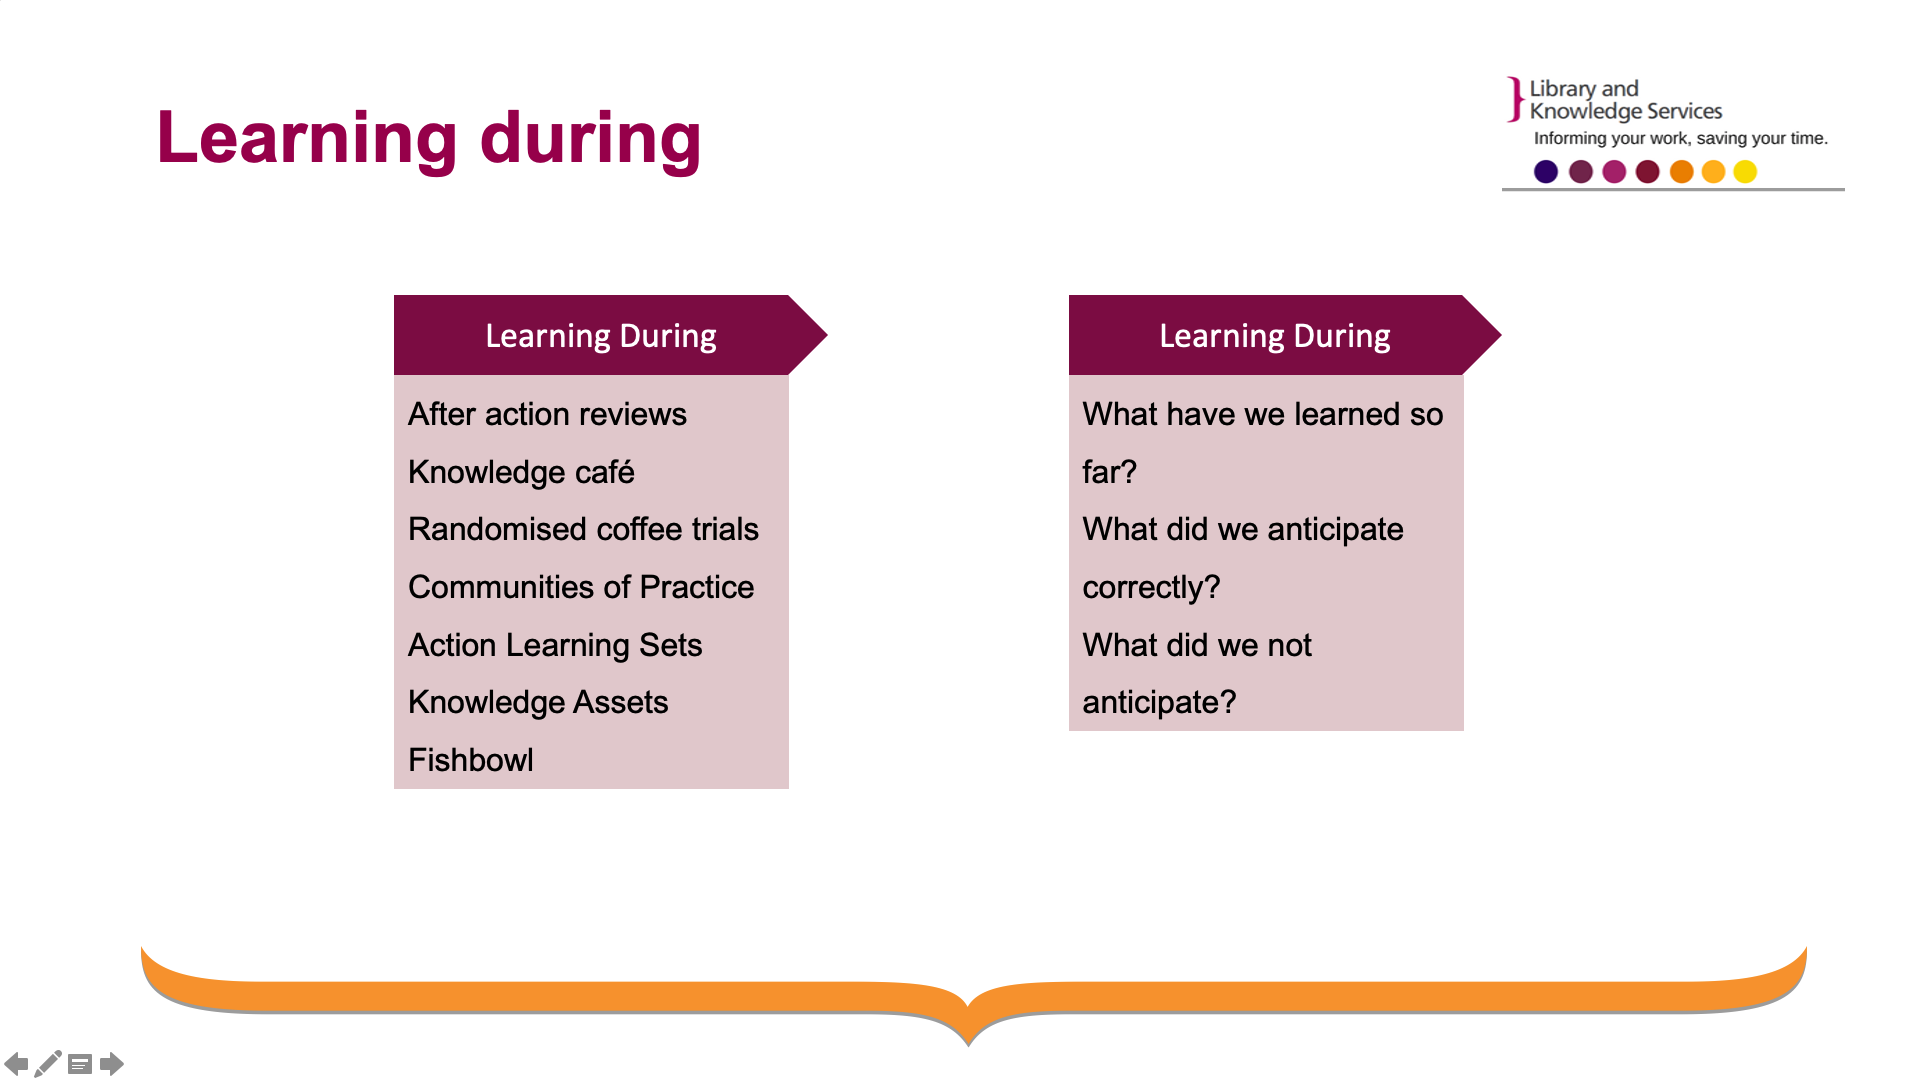 Close up of the 'learning during' section of the KM framework (After action reviews, Knowledge café, Randomised coffee trials, Communities of Practice, Action Learning Sets ,Knowledge Assets, Fishbowl) with questions to the side of it. These questions are: 